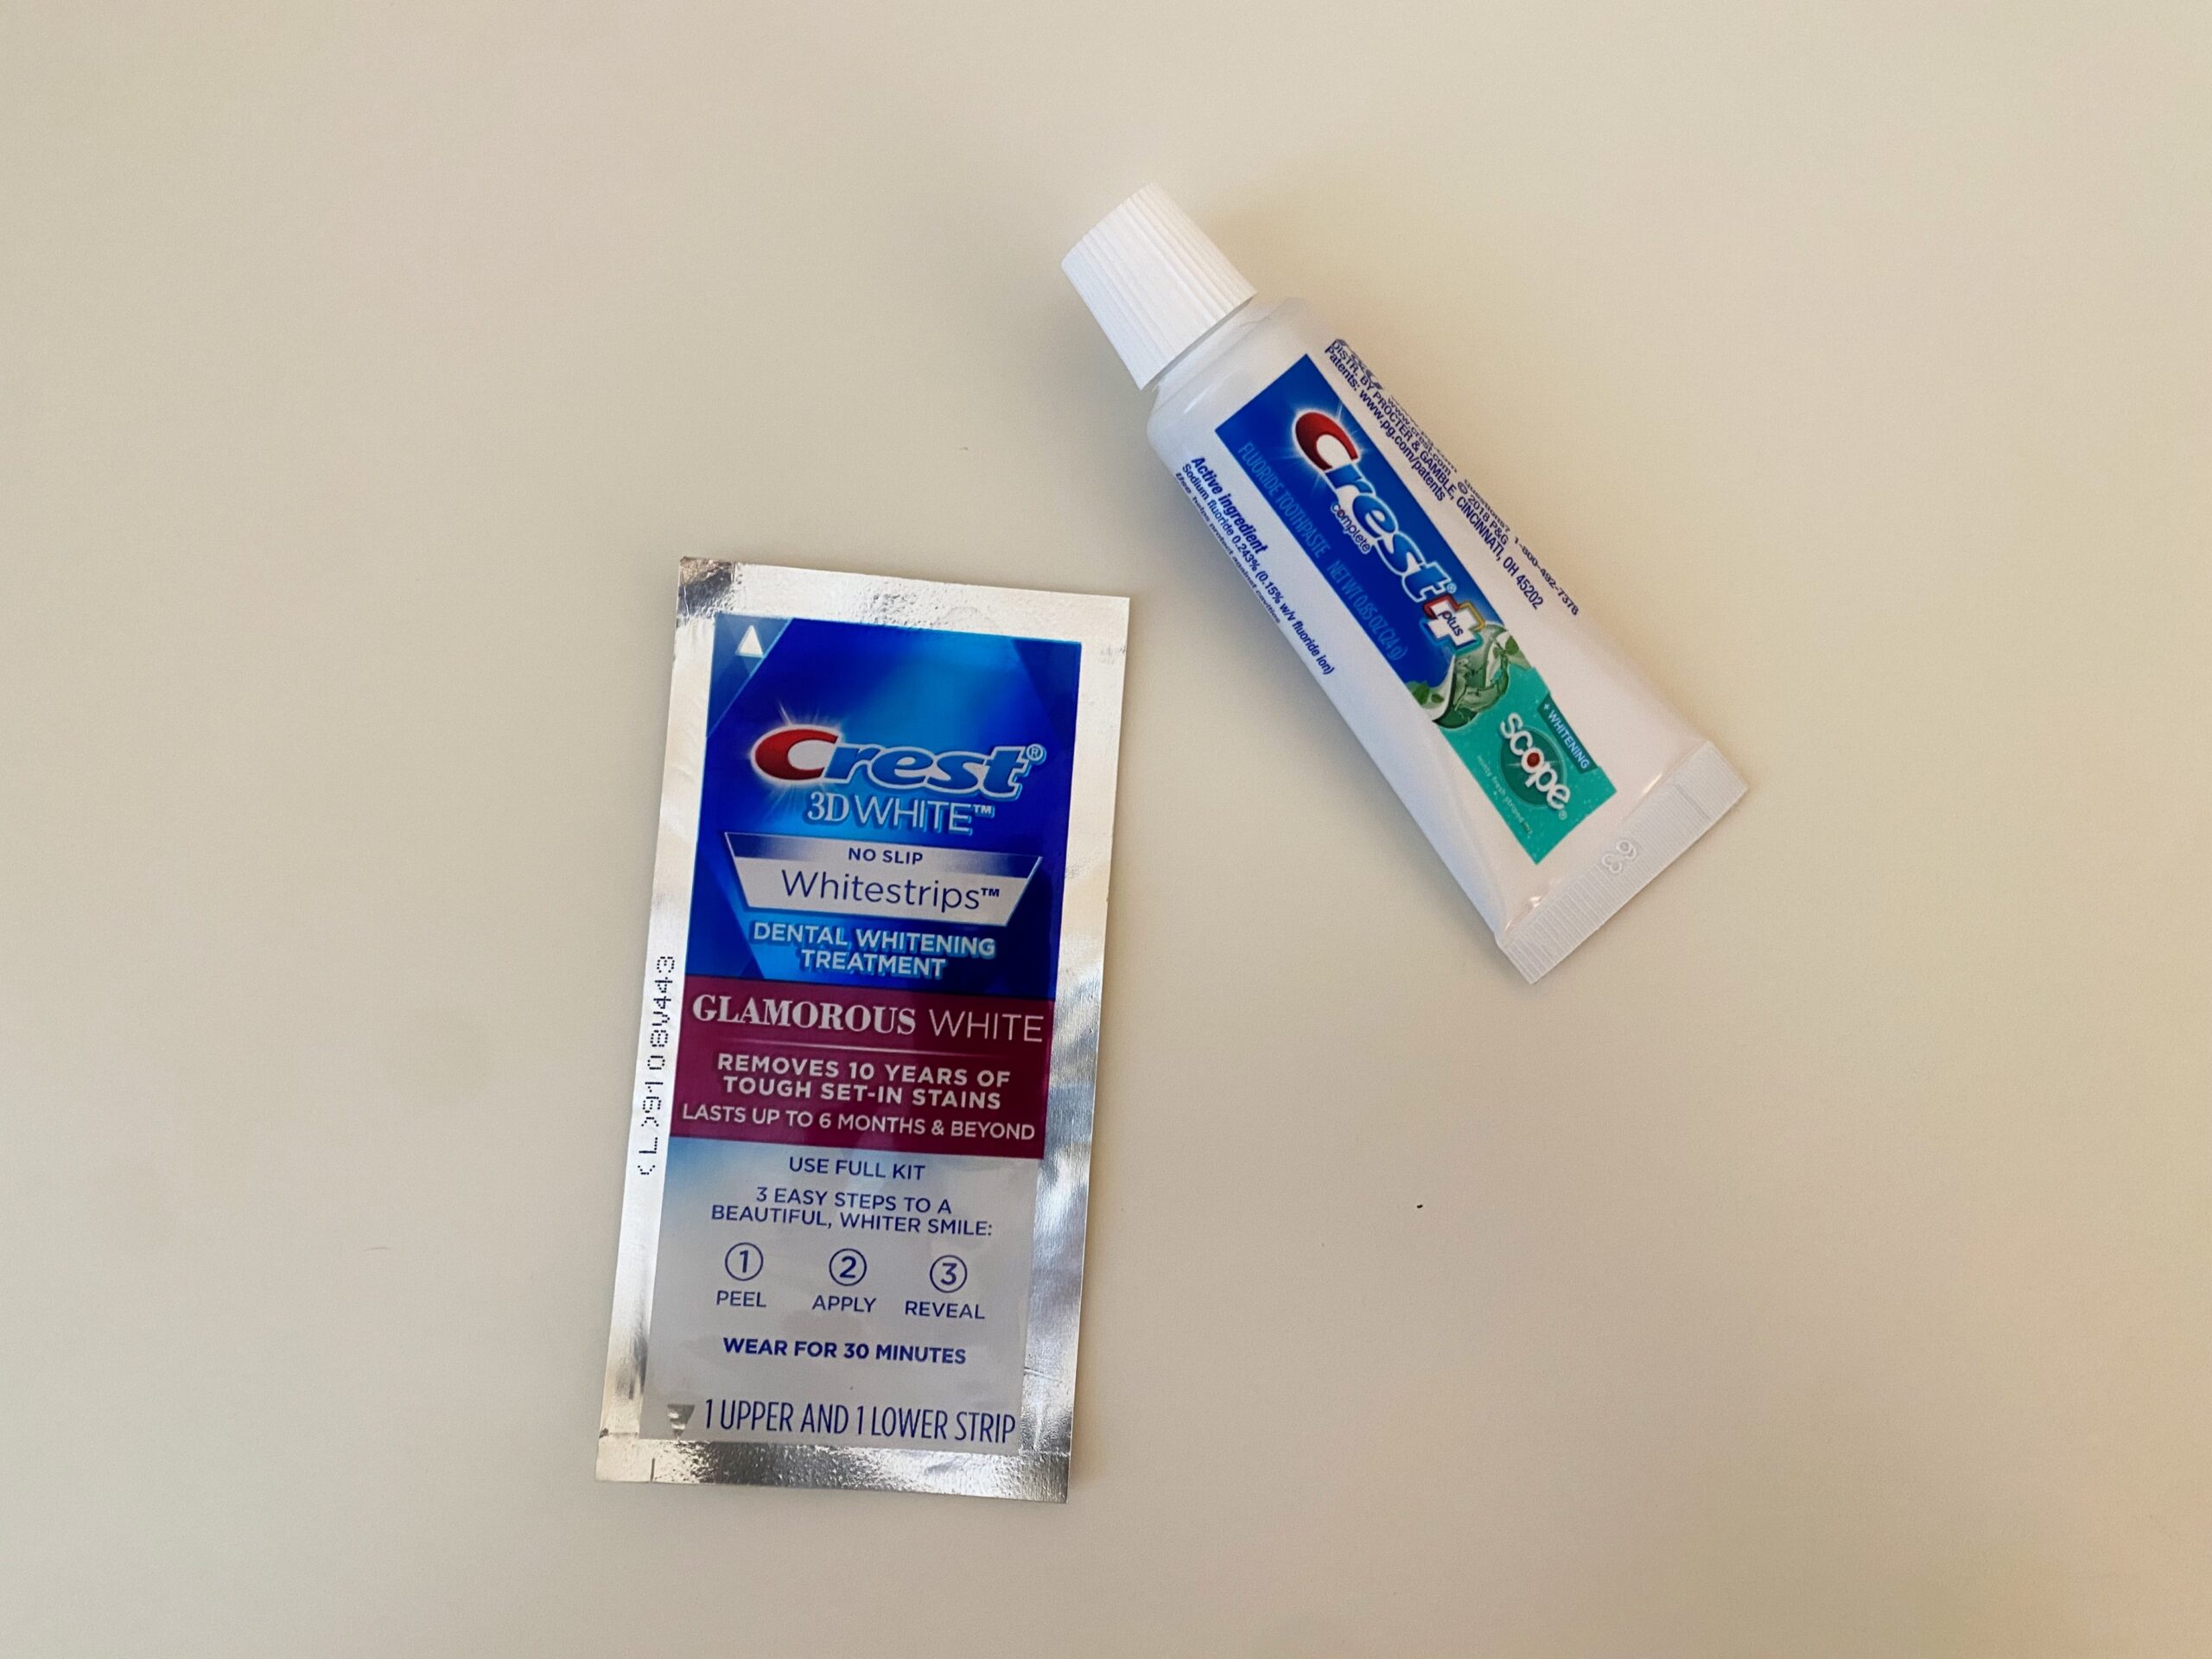 Crest 3D Whitestrips and travel size Crest toothpaste